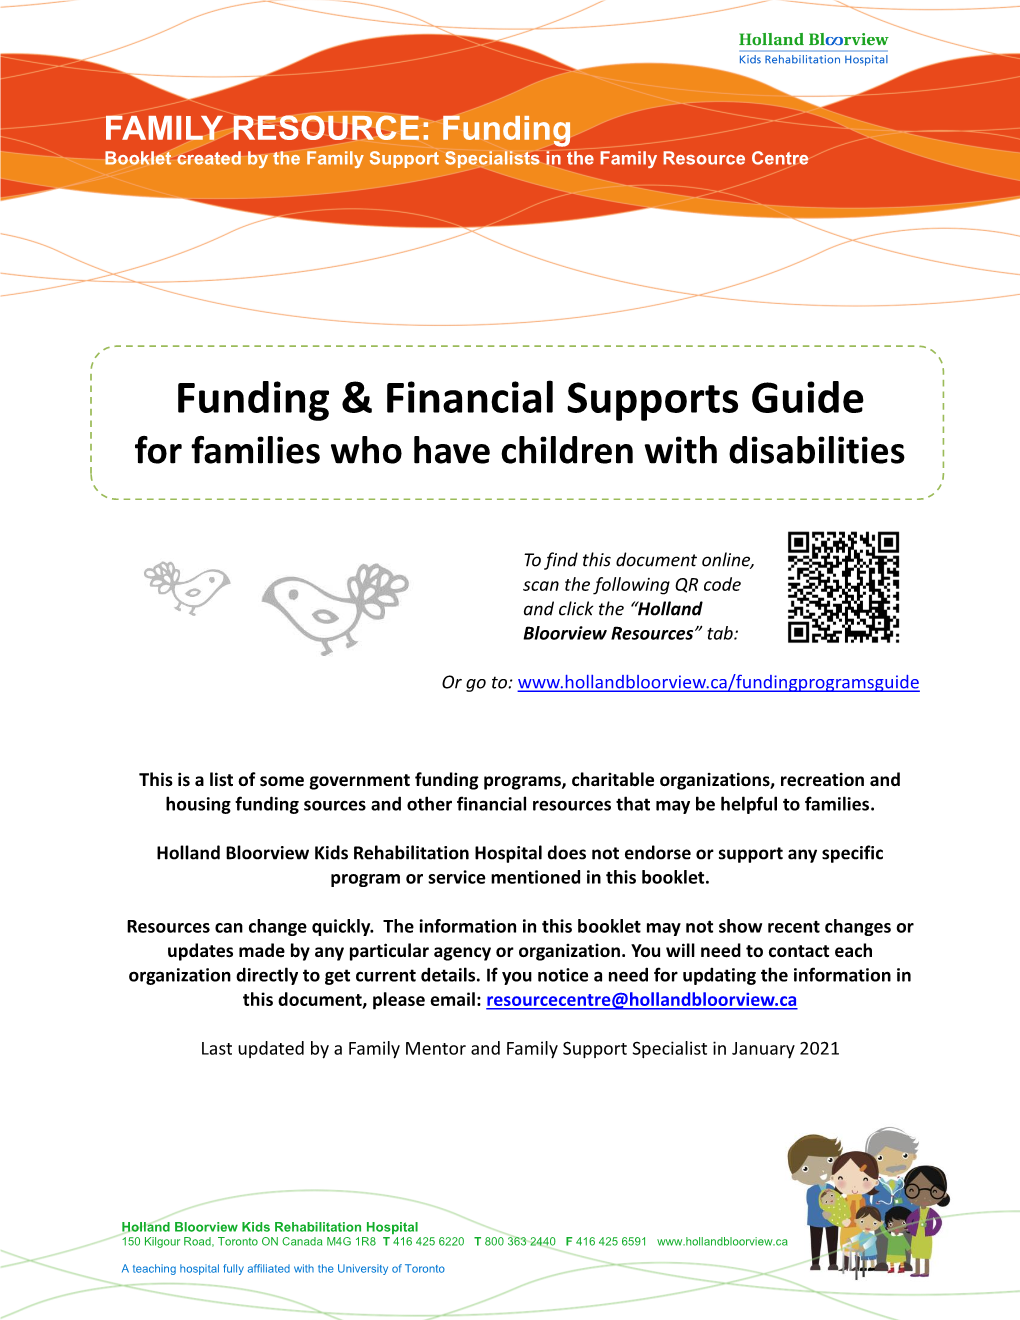 Funding & Financial Supports Guide